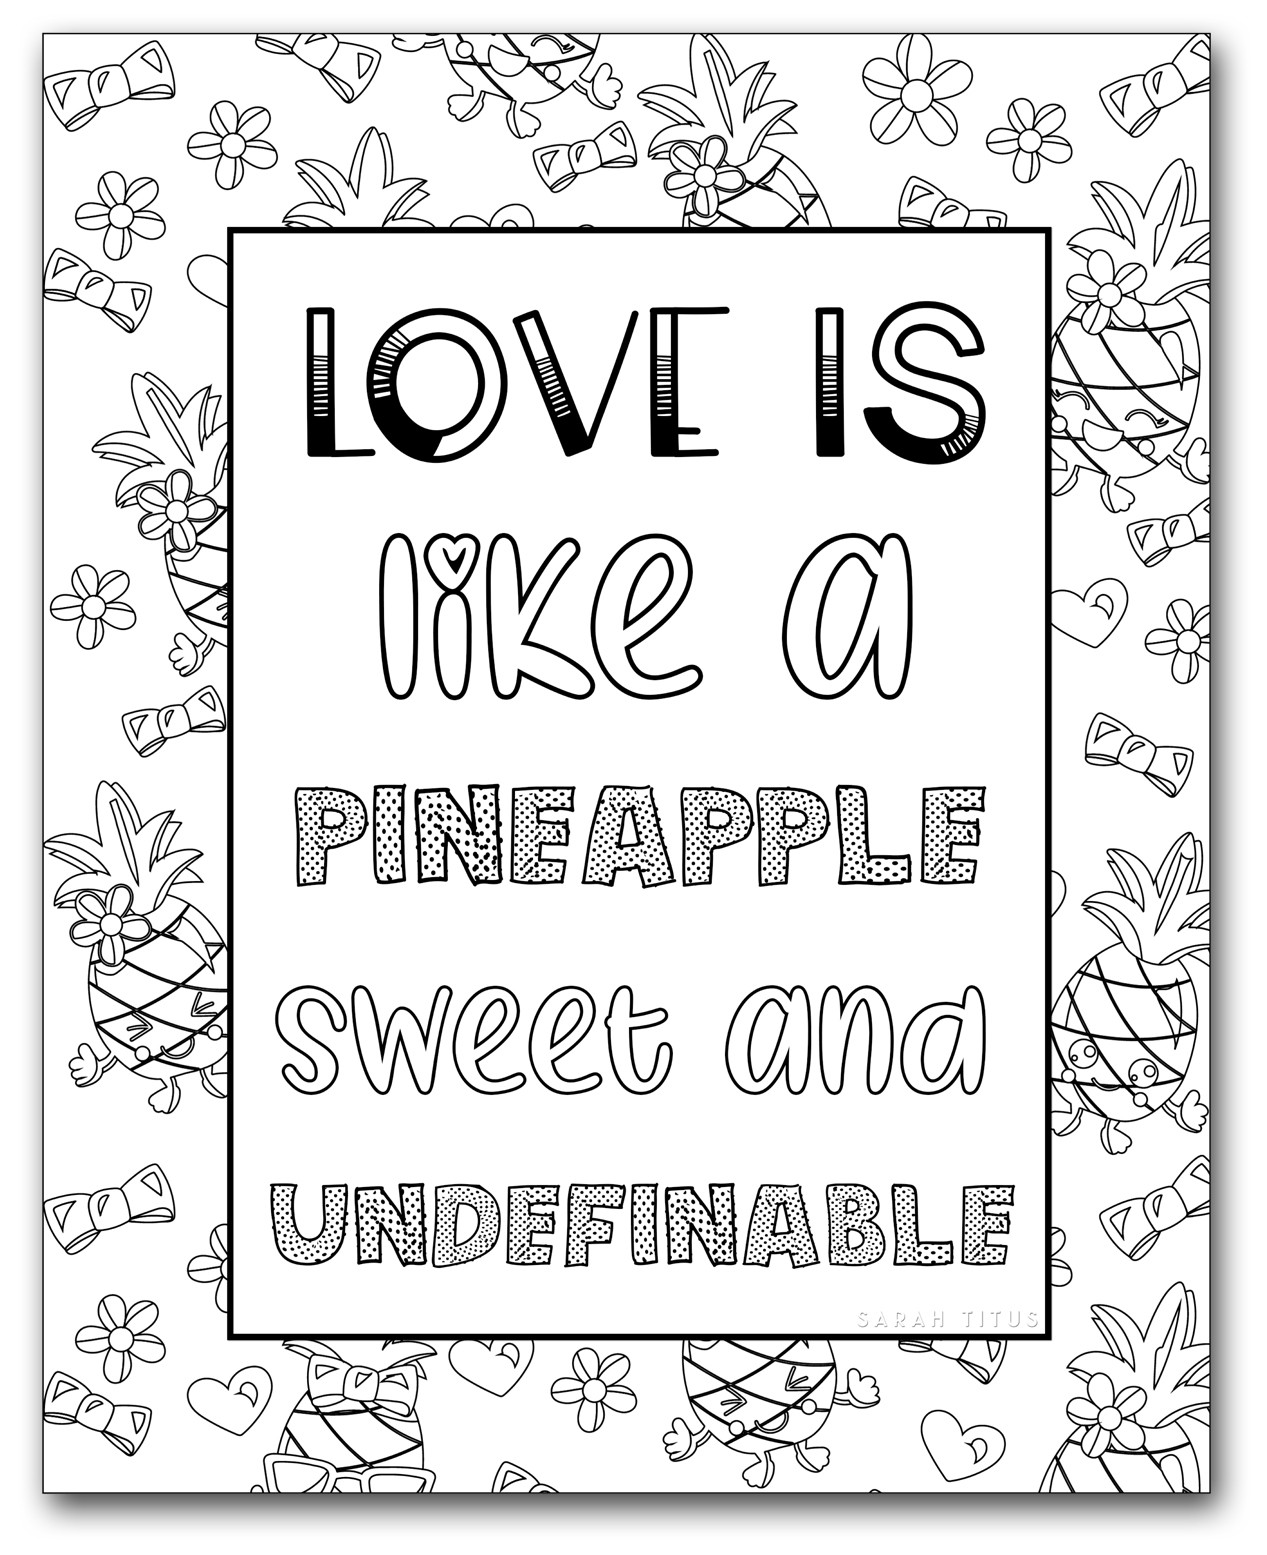 Printable Coloring Pages For Teenage Girls
 Printable Coloring Pages for Girls Sarah Titus